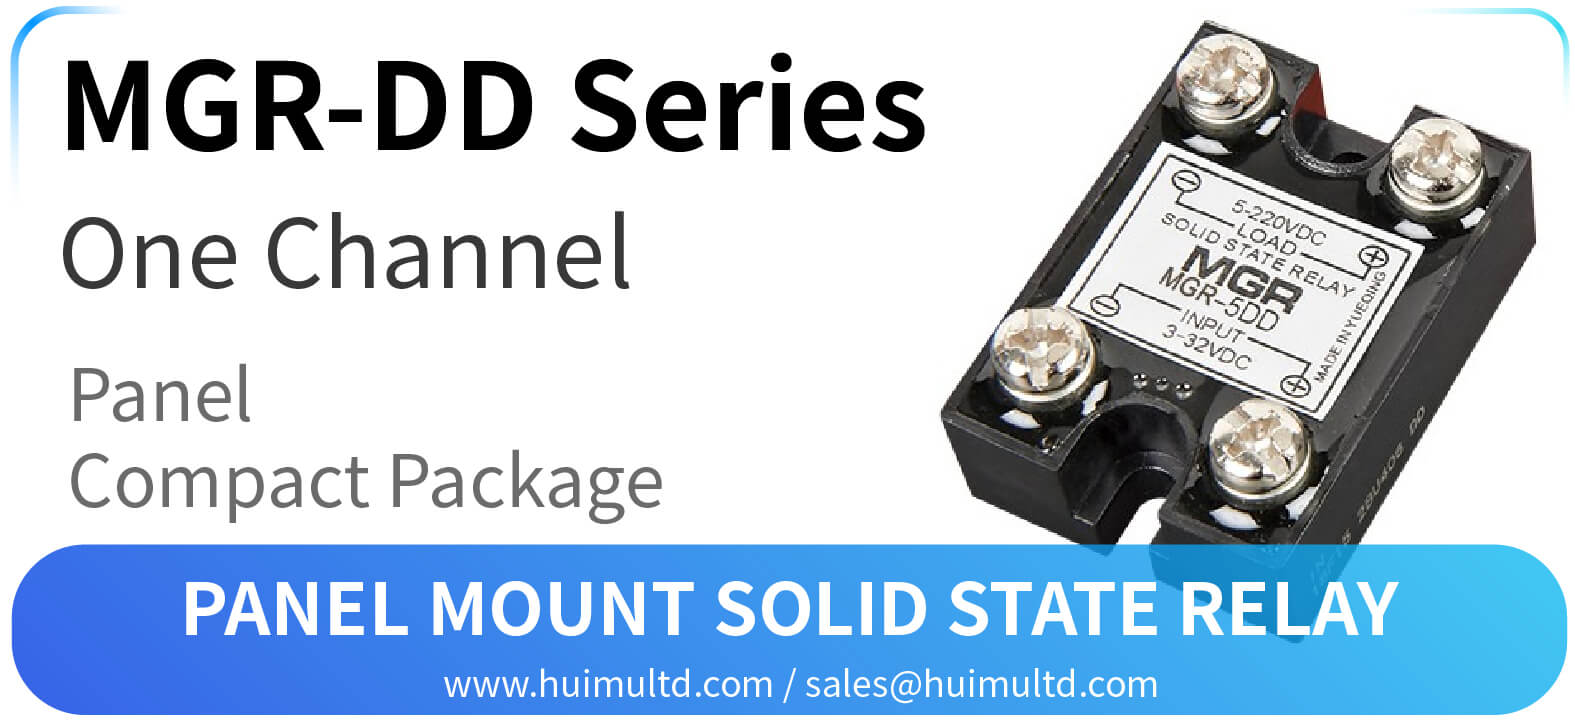 MGR-DD Series Panel Mount Solid State Relay